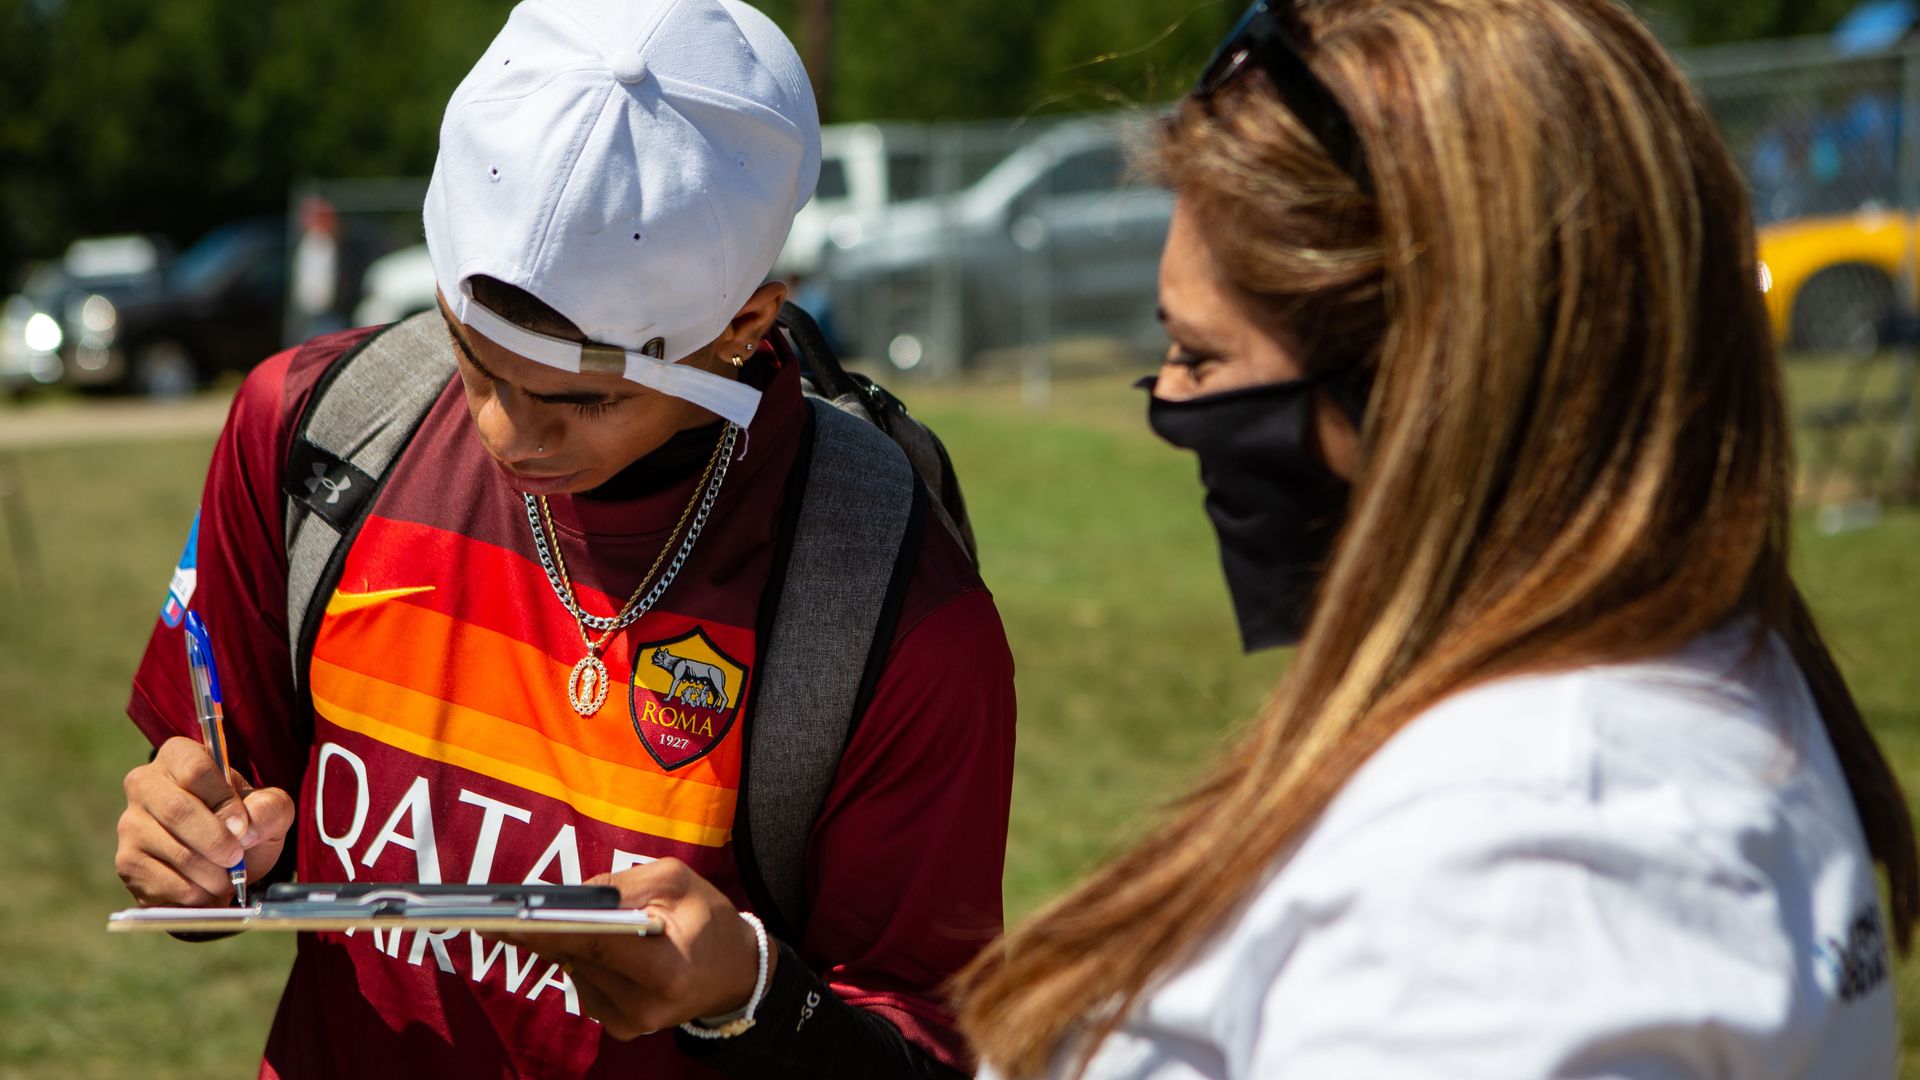 Sandra Amado Gomez registers a soccer player to vote during halftime at the championship game of soccer in Raleigh, North Carolina .